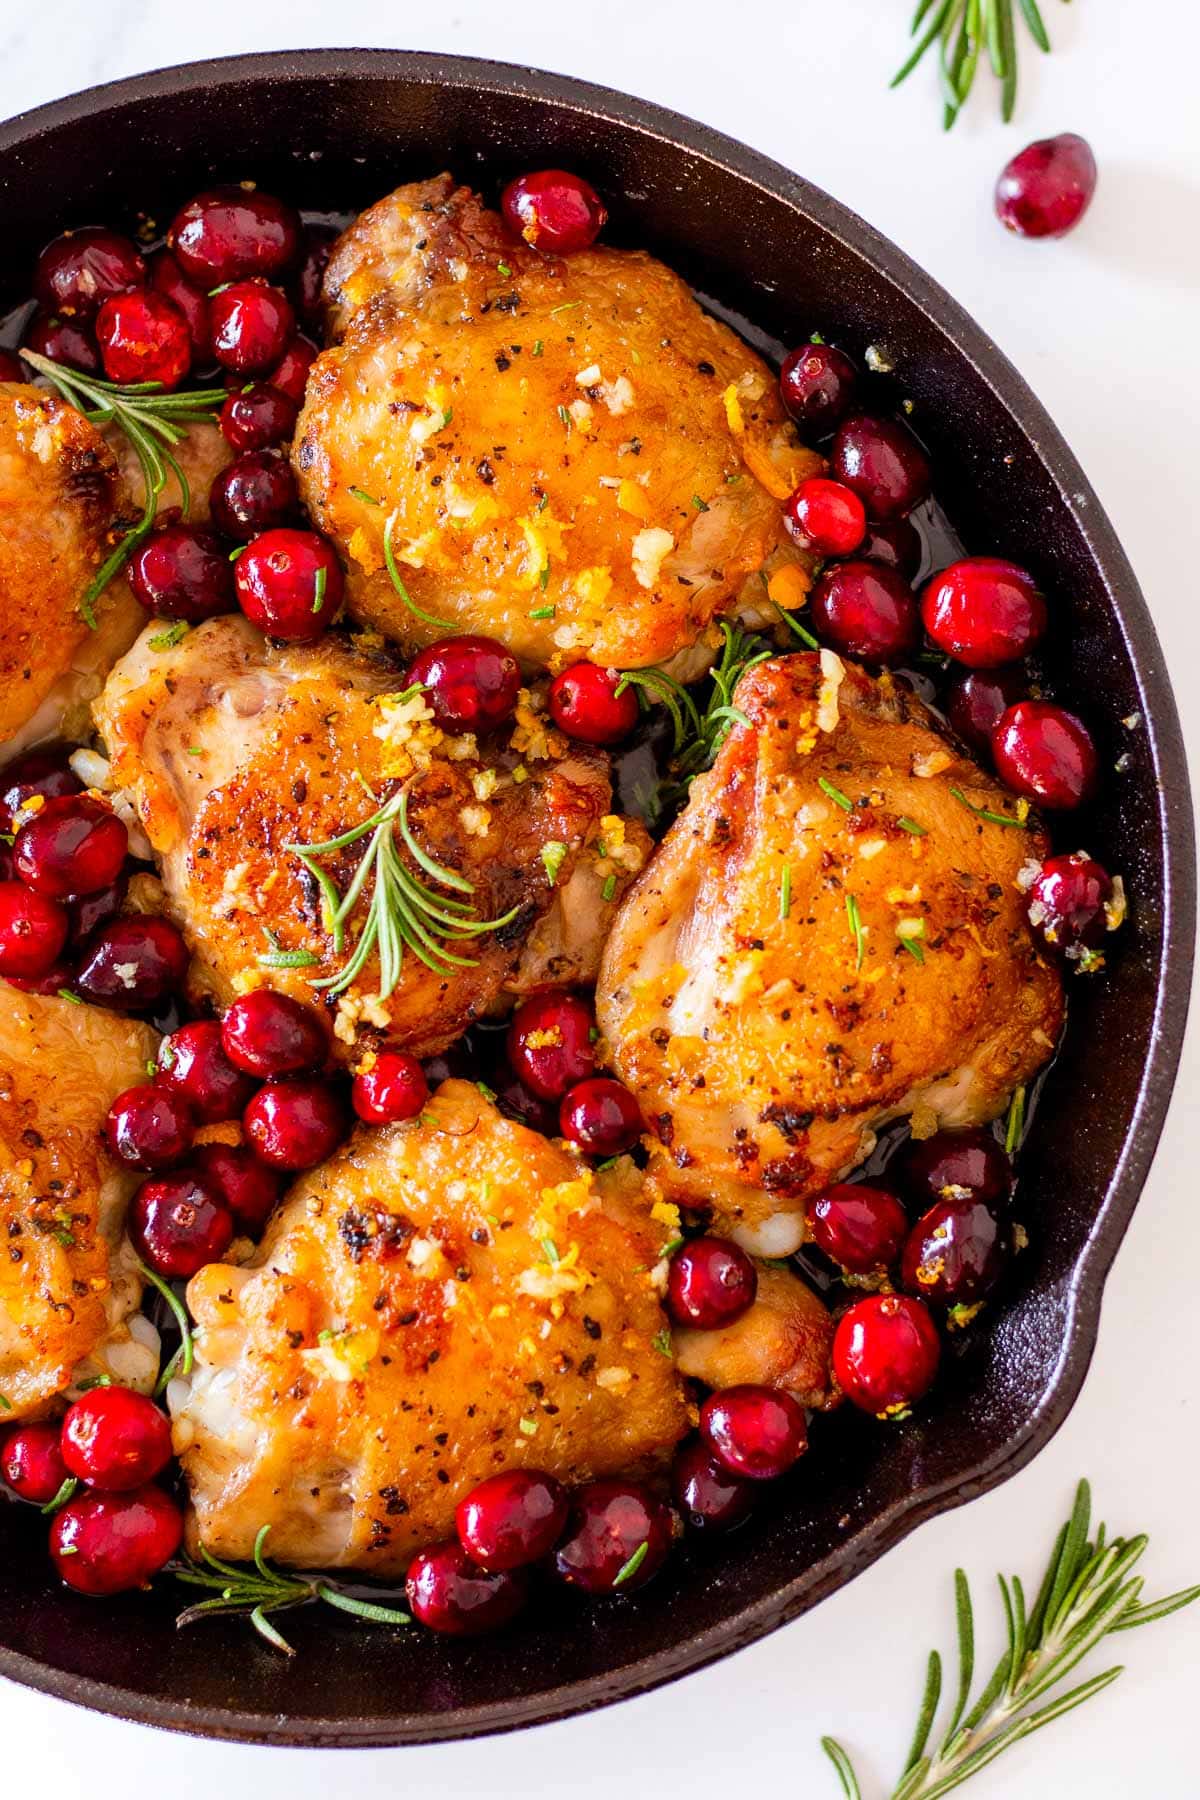 Seared chicken in a pan with cranberries, orange and fresh rosemary.